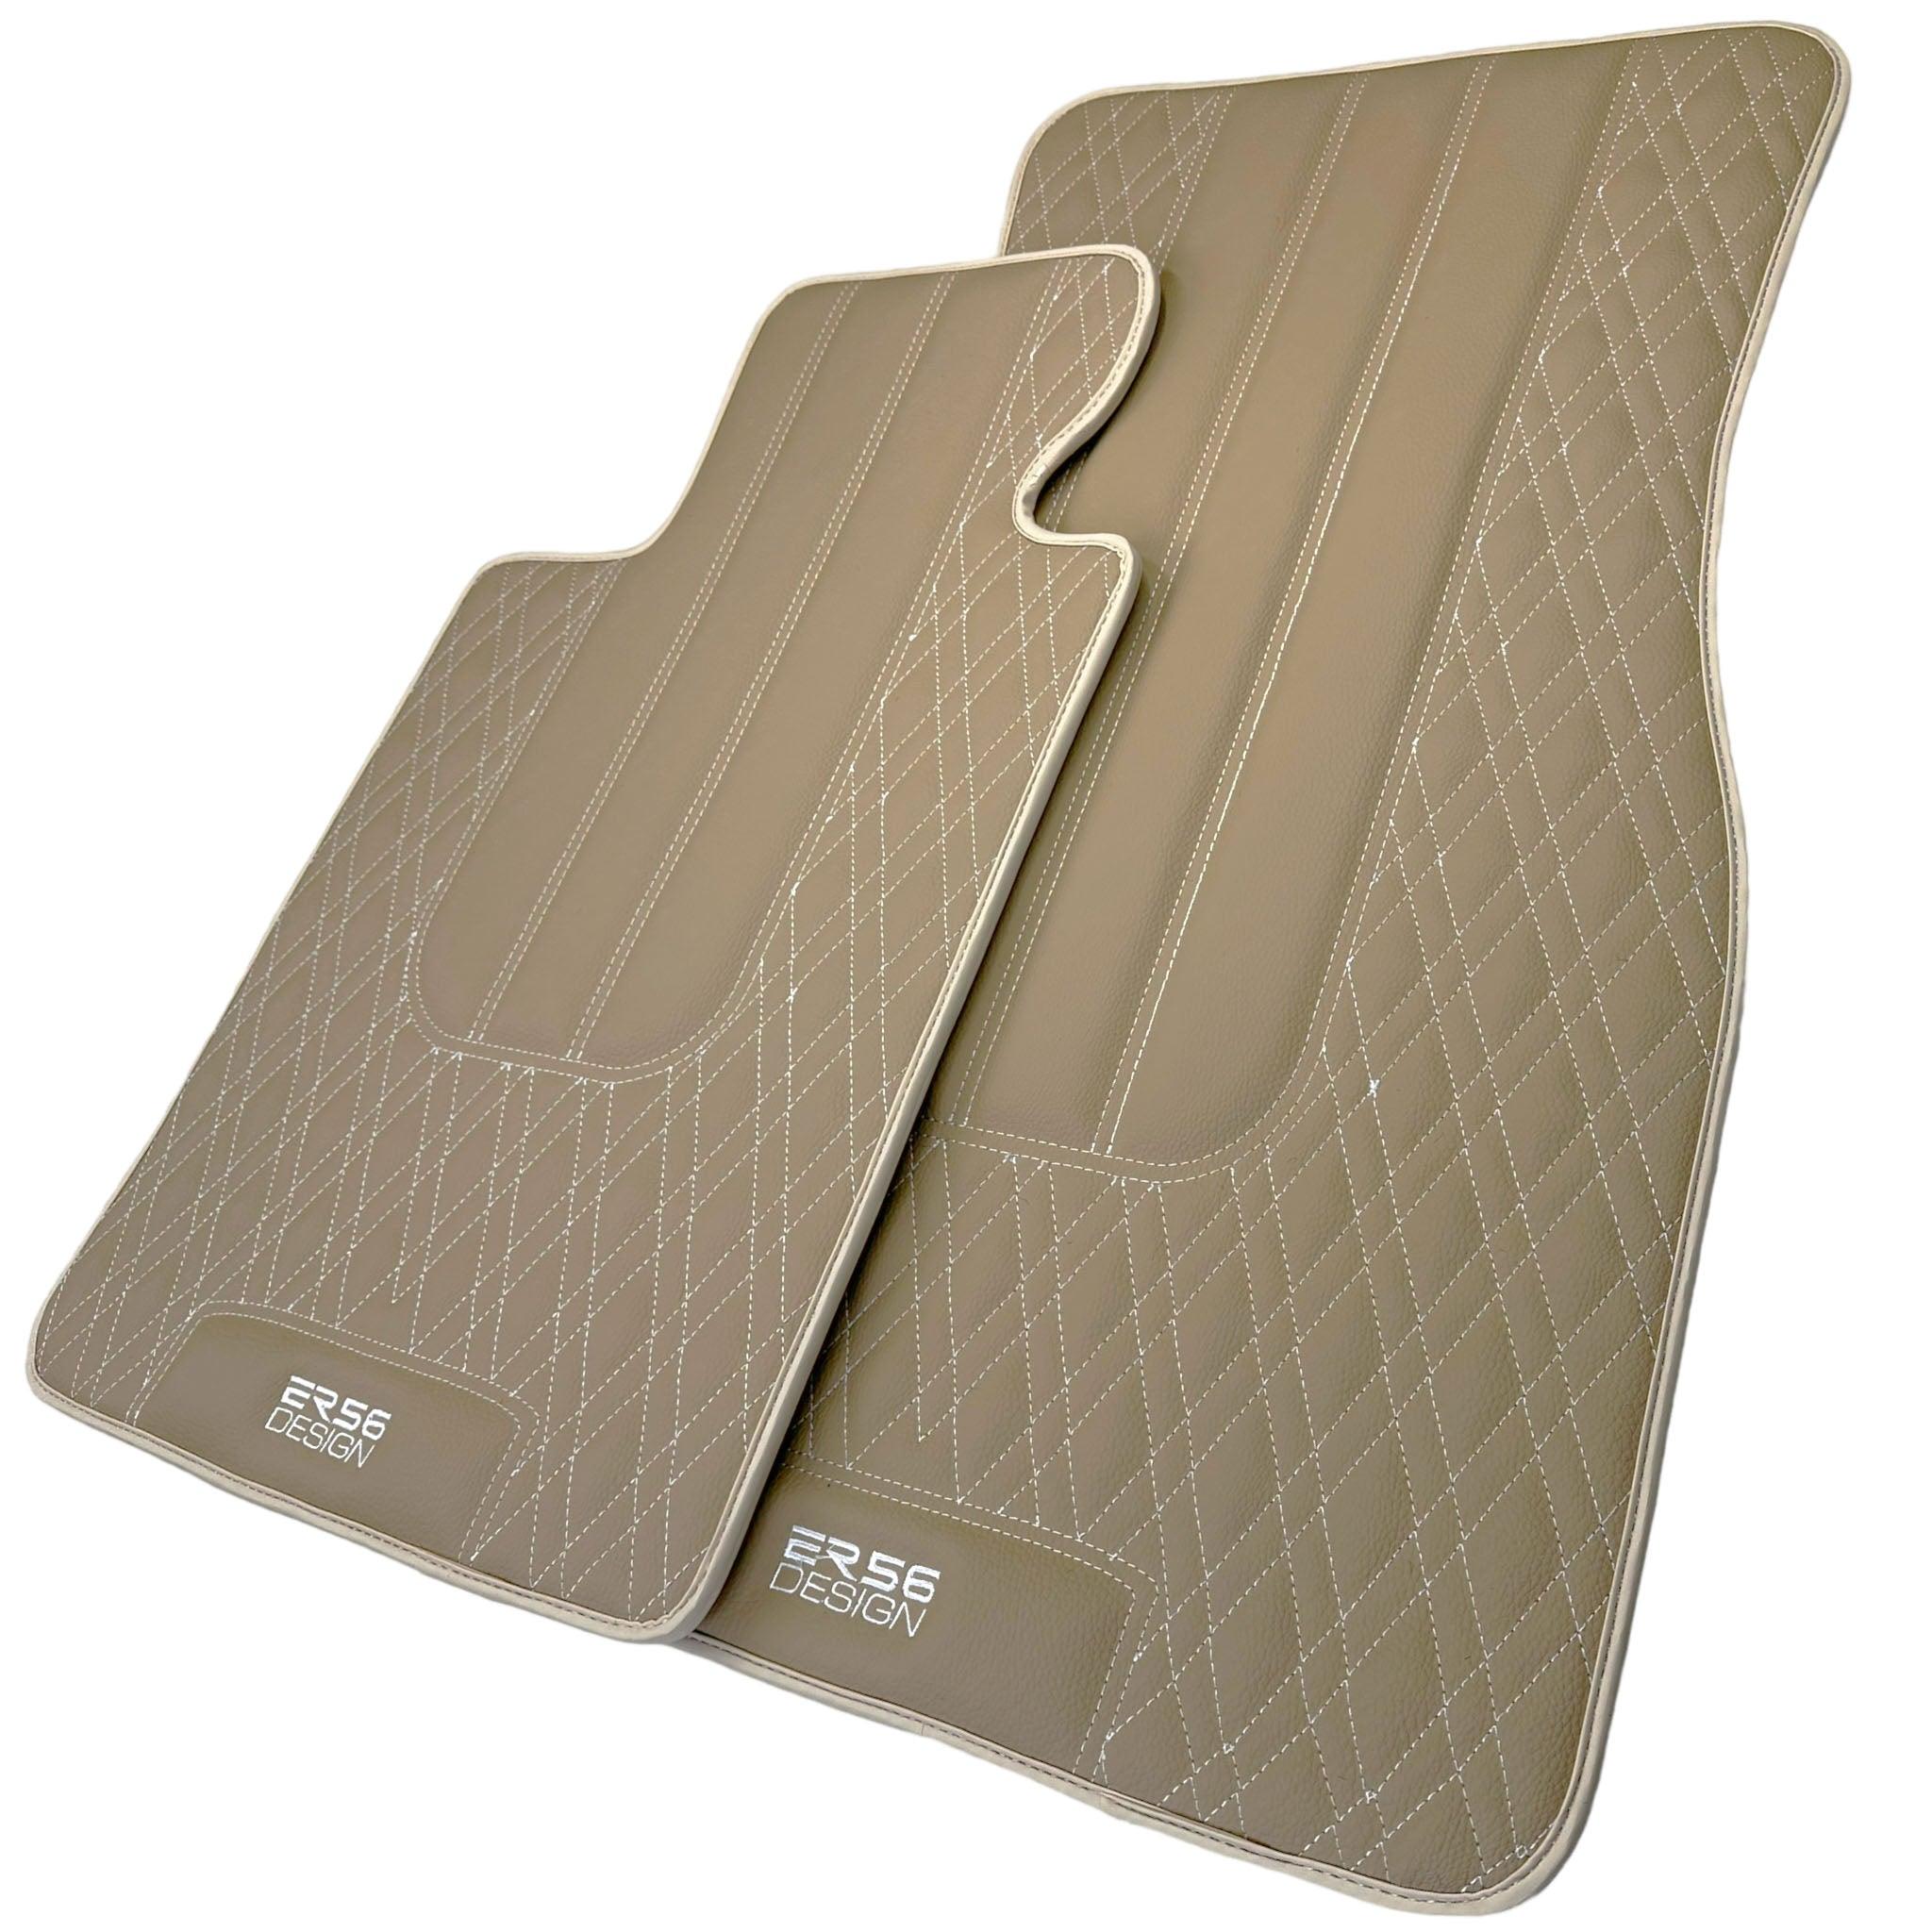 Beige Leather Floor Mats For BMW 3 Series E30 2-doors Coupe